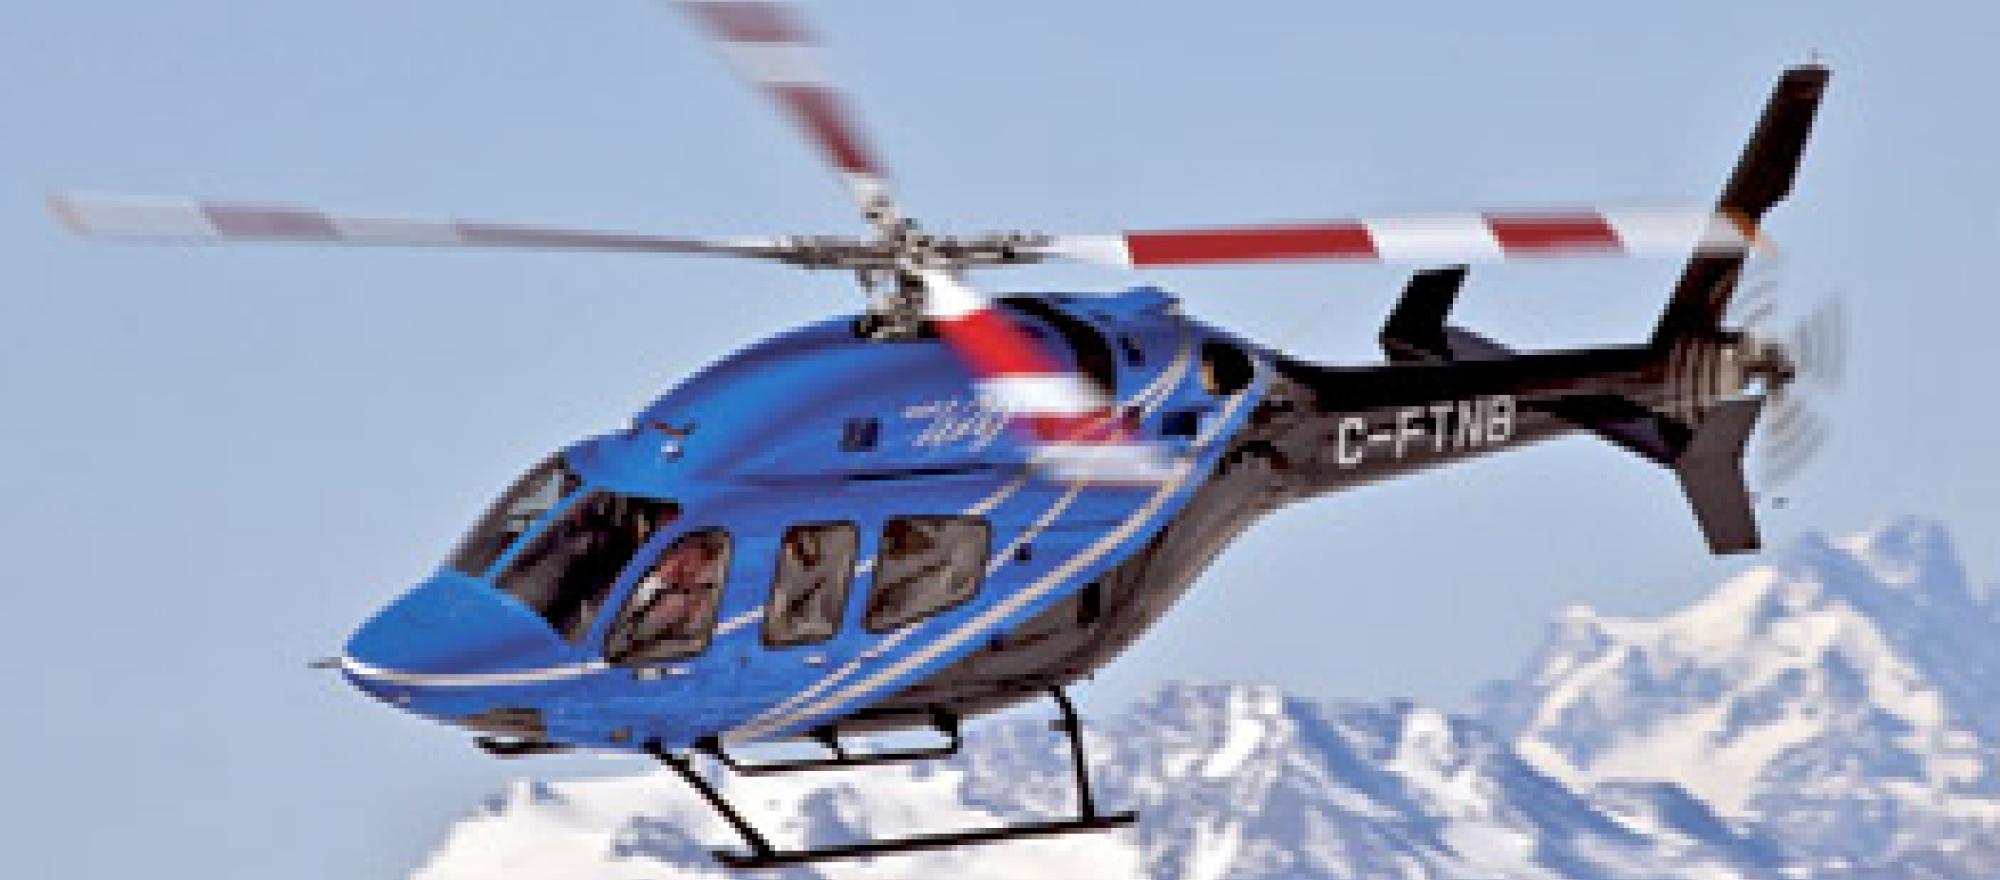 The Bell 429 has inherited some systems and parts from earlier Bell helicopte